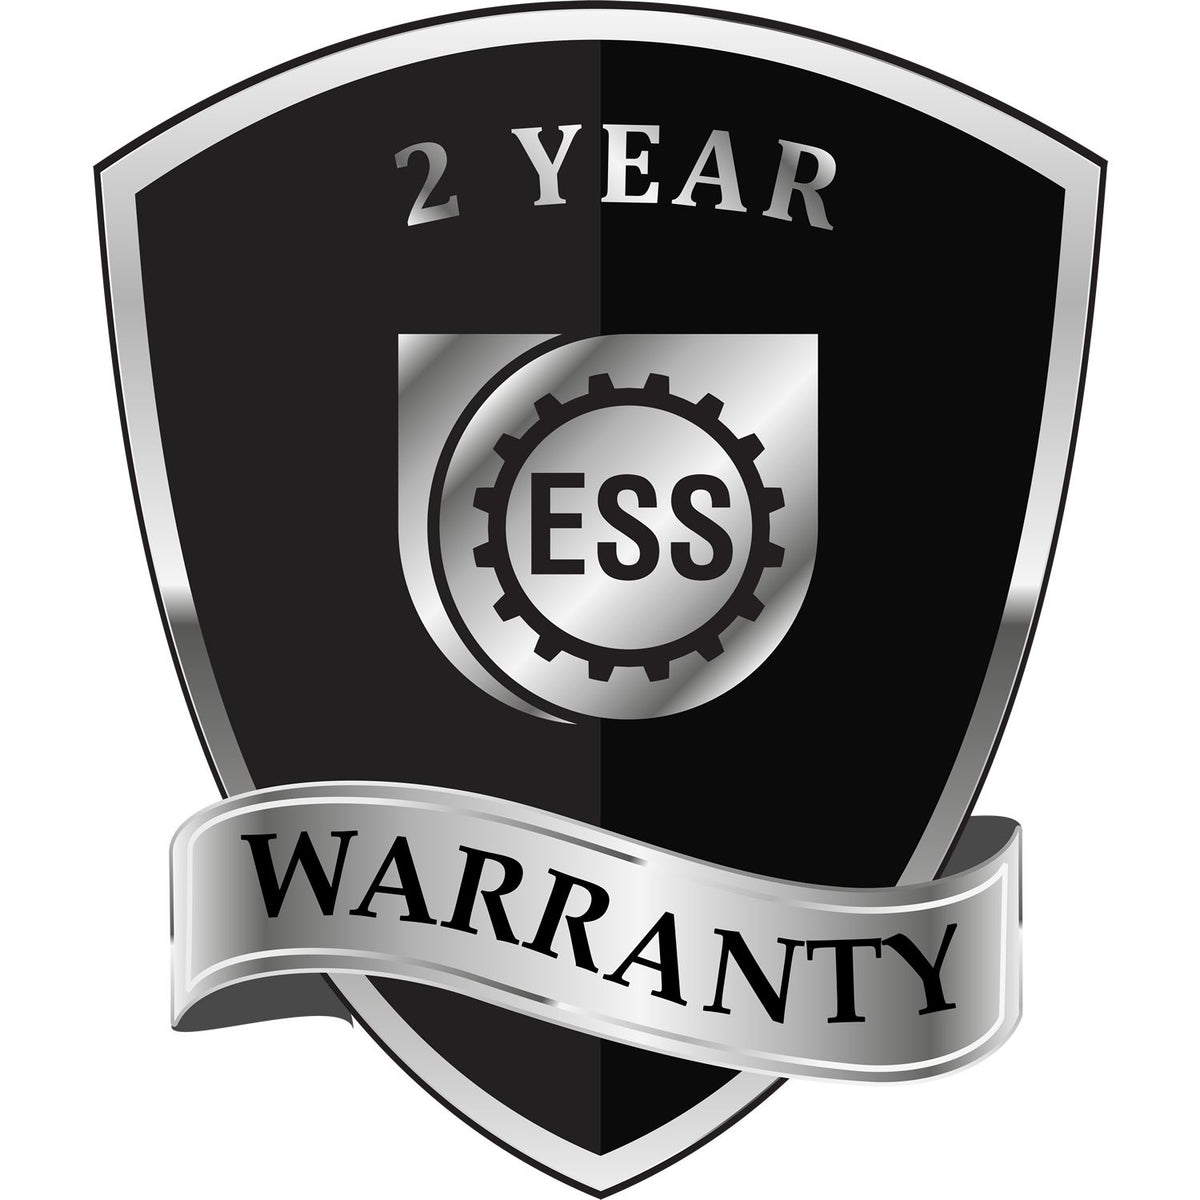 A black and silver badge or emblem showing warranty information for the Hybrid Hawaii Architect Seal